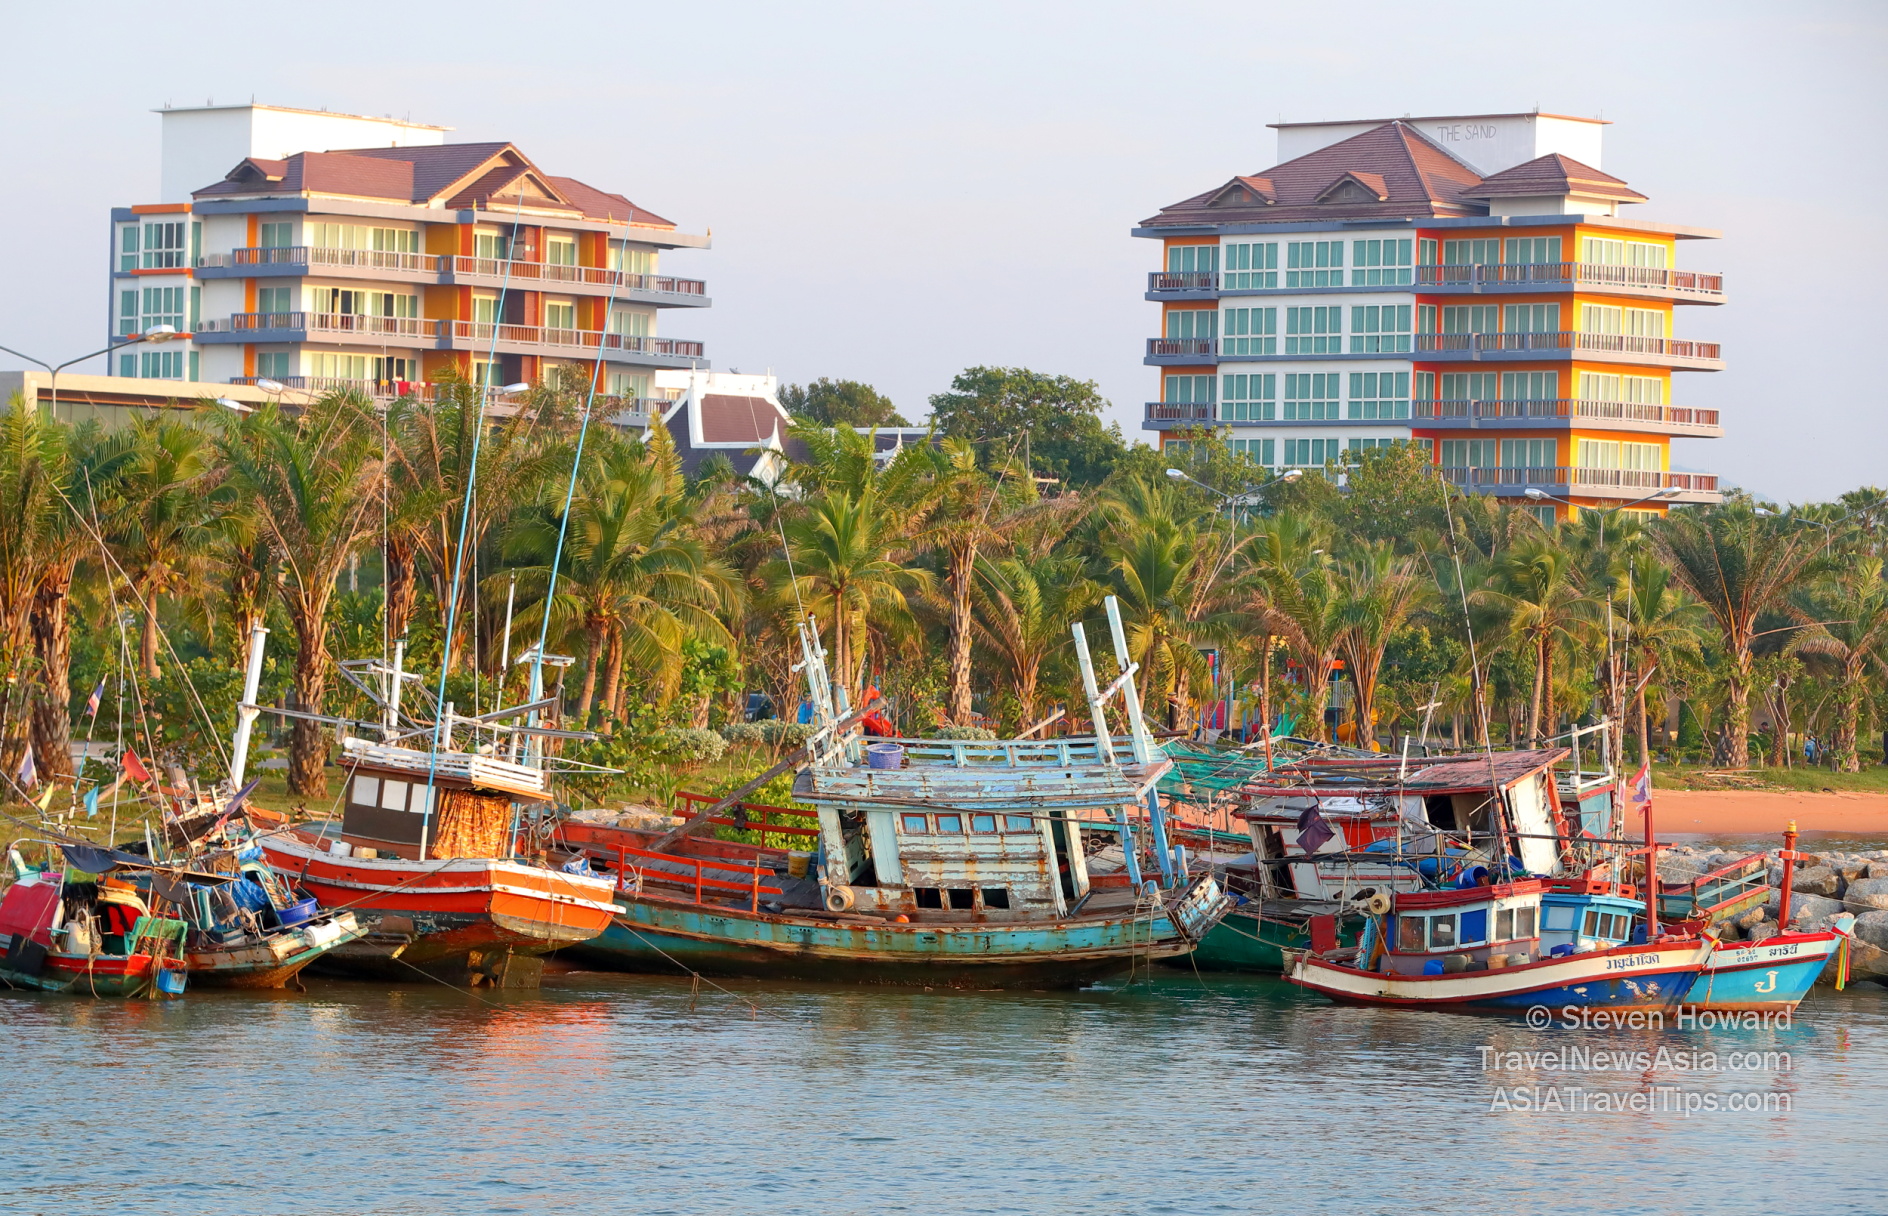 Fishing boats in Jomtien, Thailand. Picture by Steven Howard of TravelNewsAsia.com. Click to enlarge.